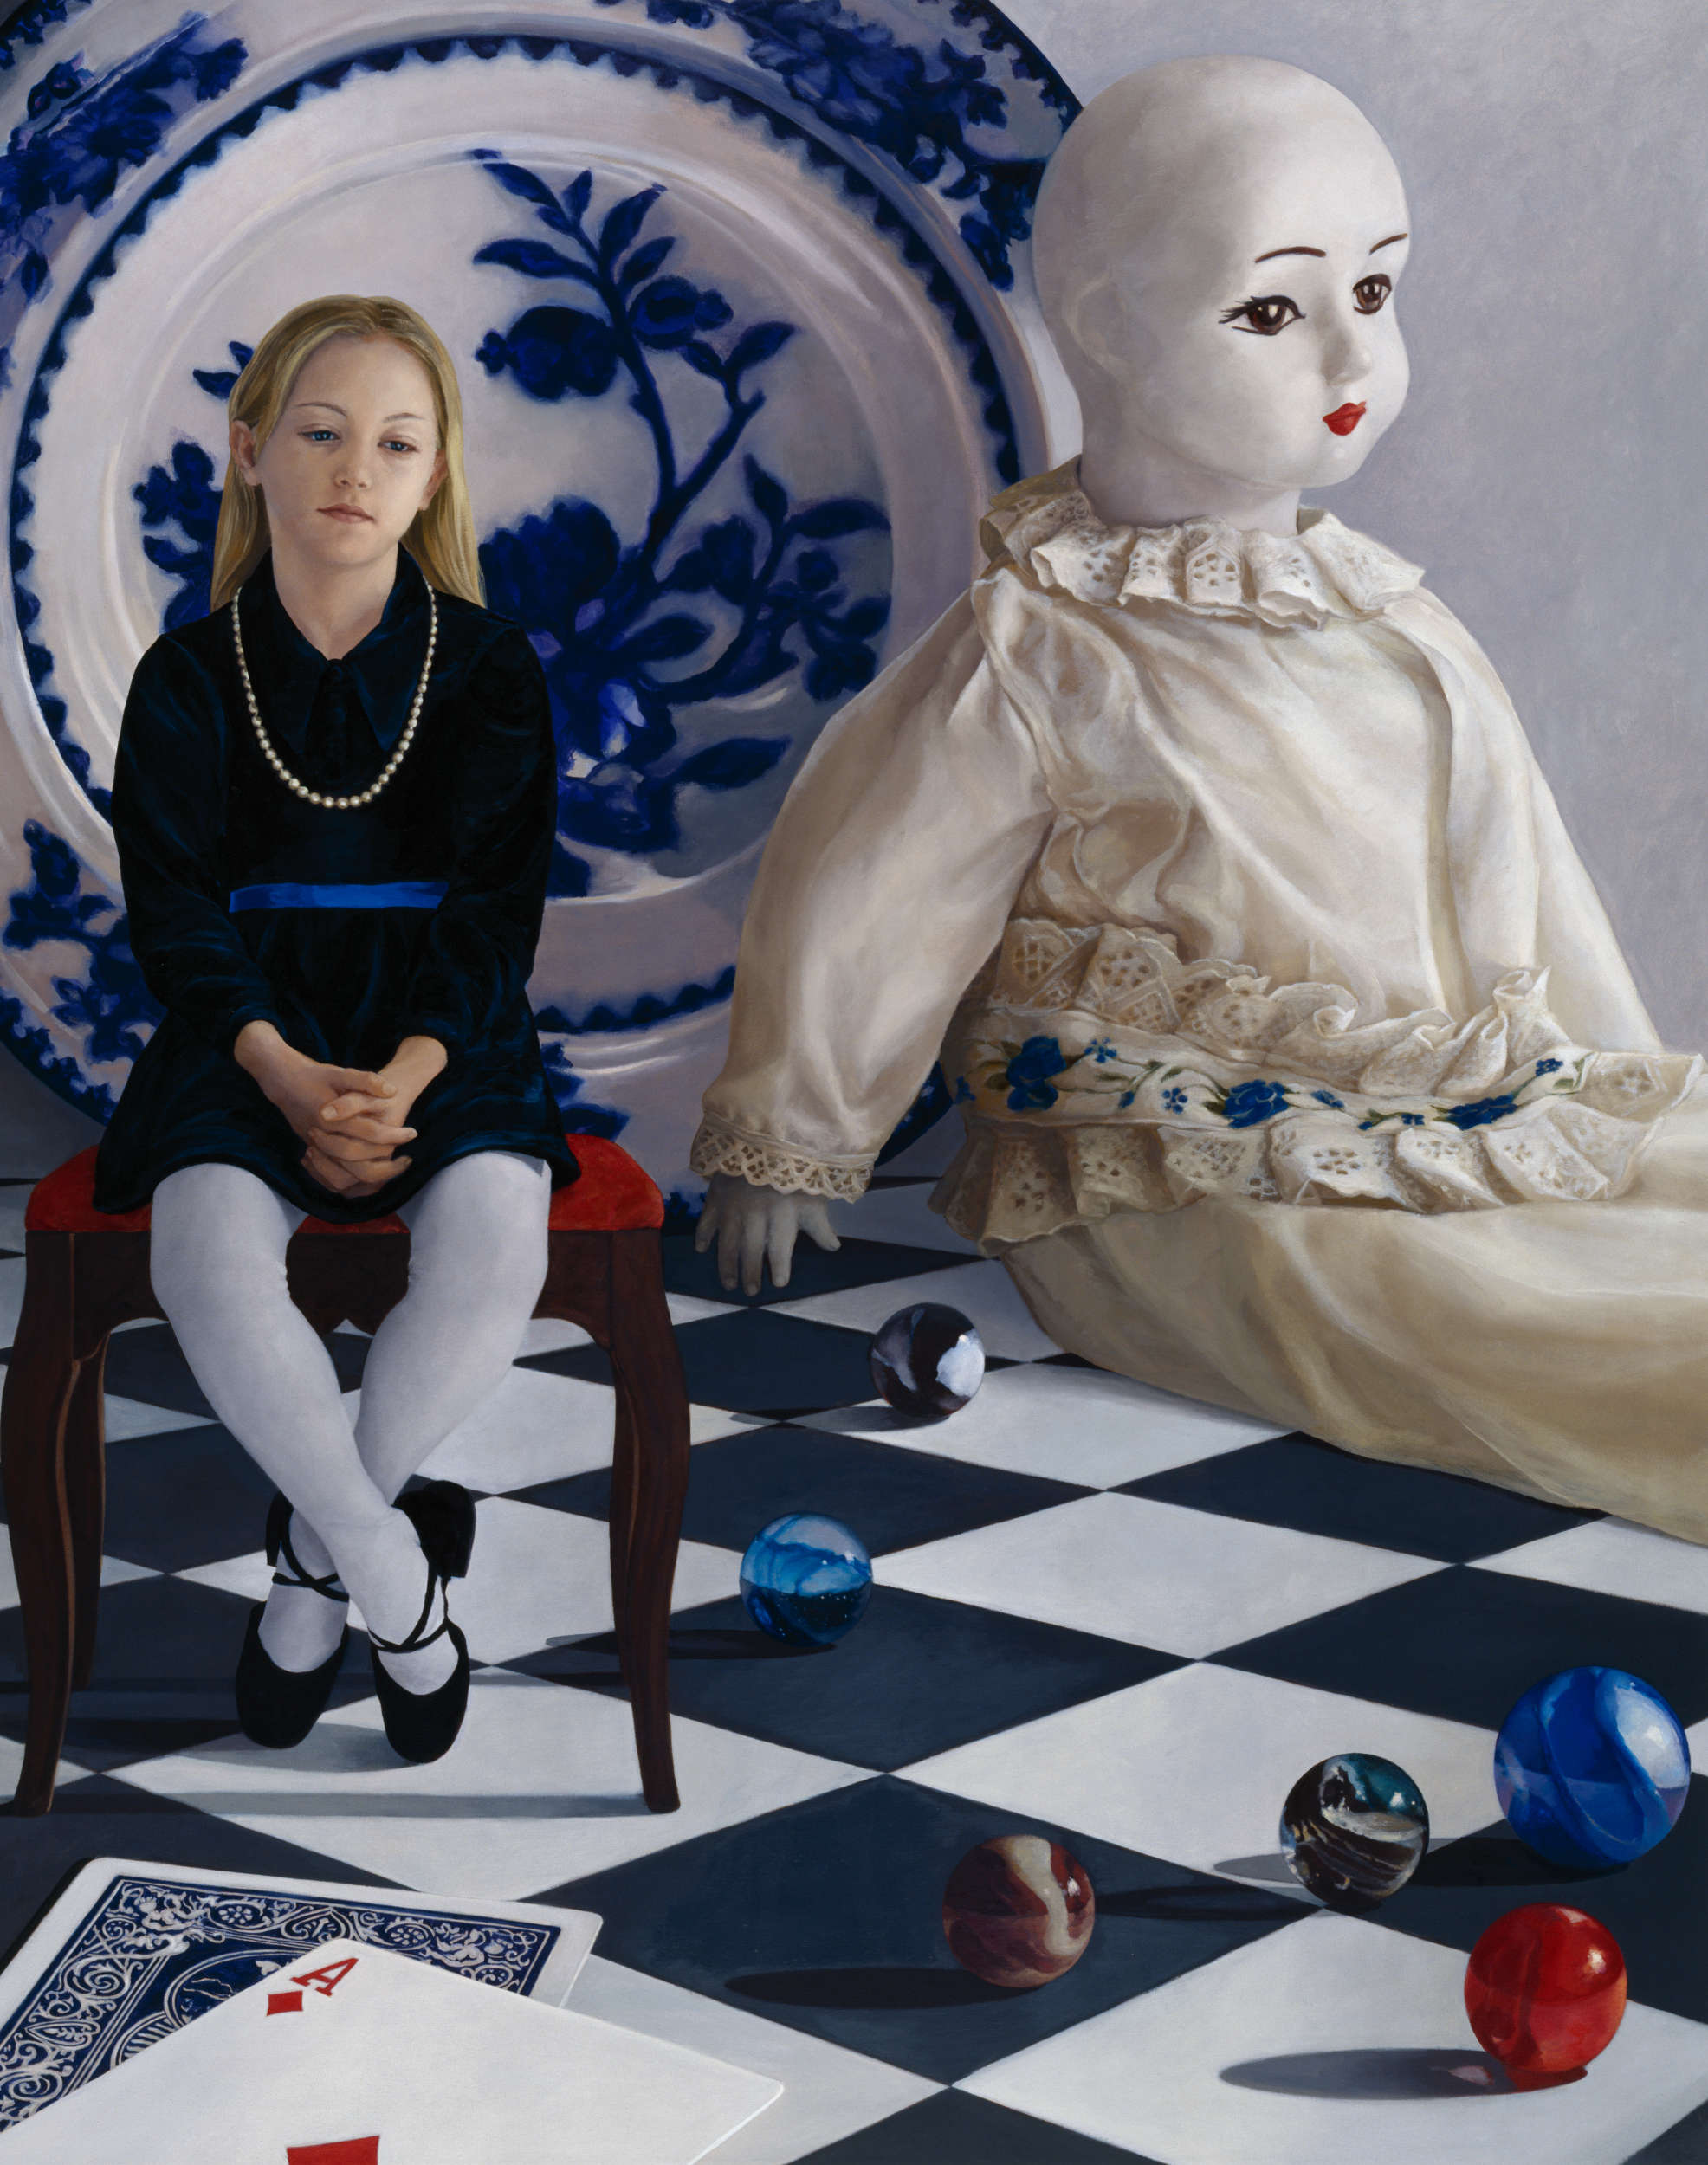 little girl sitting on a bench, giant doll, marbles, giant flow blue porcelain plate, ace of diamonds